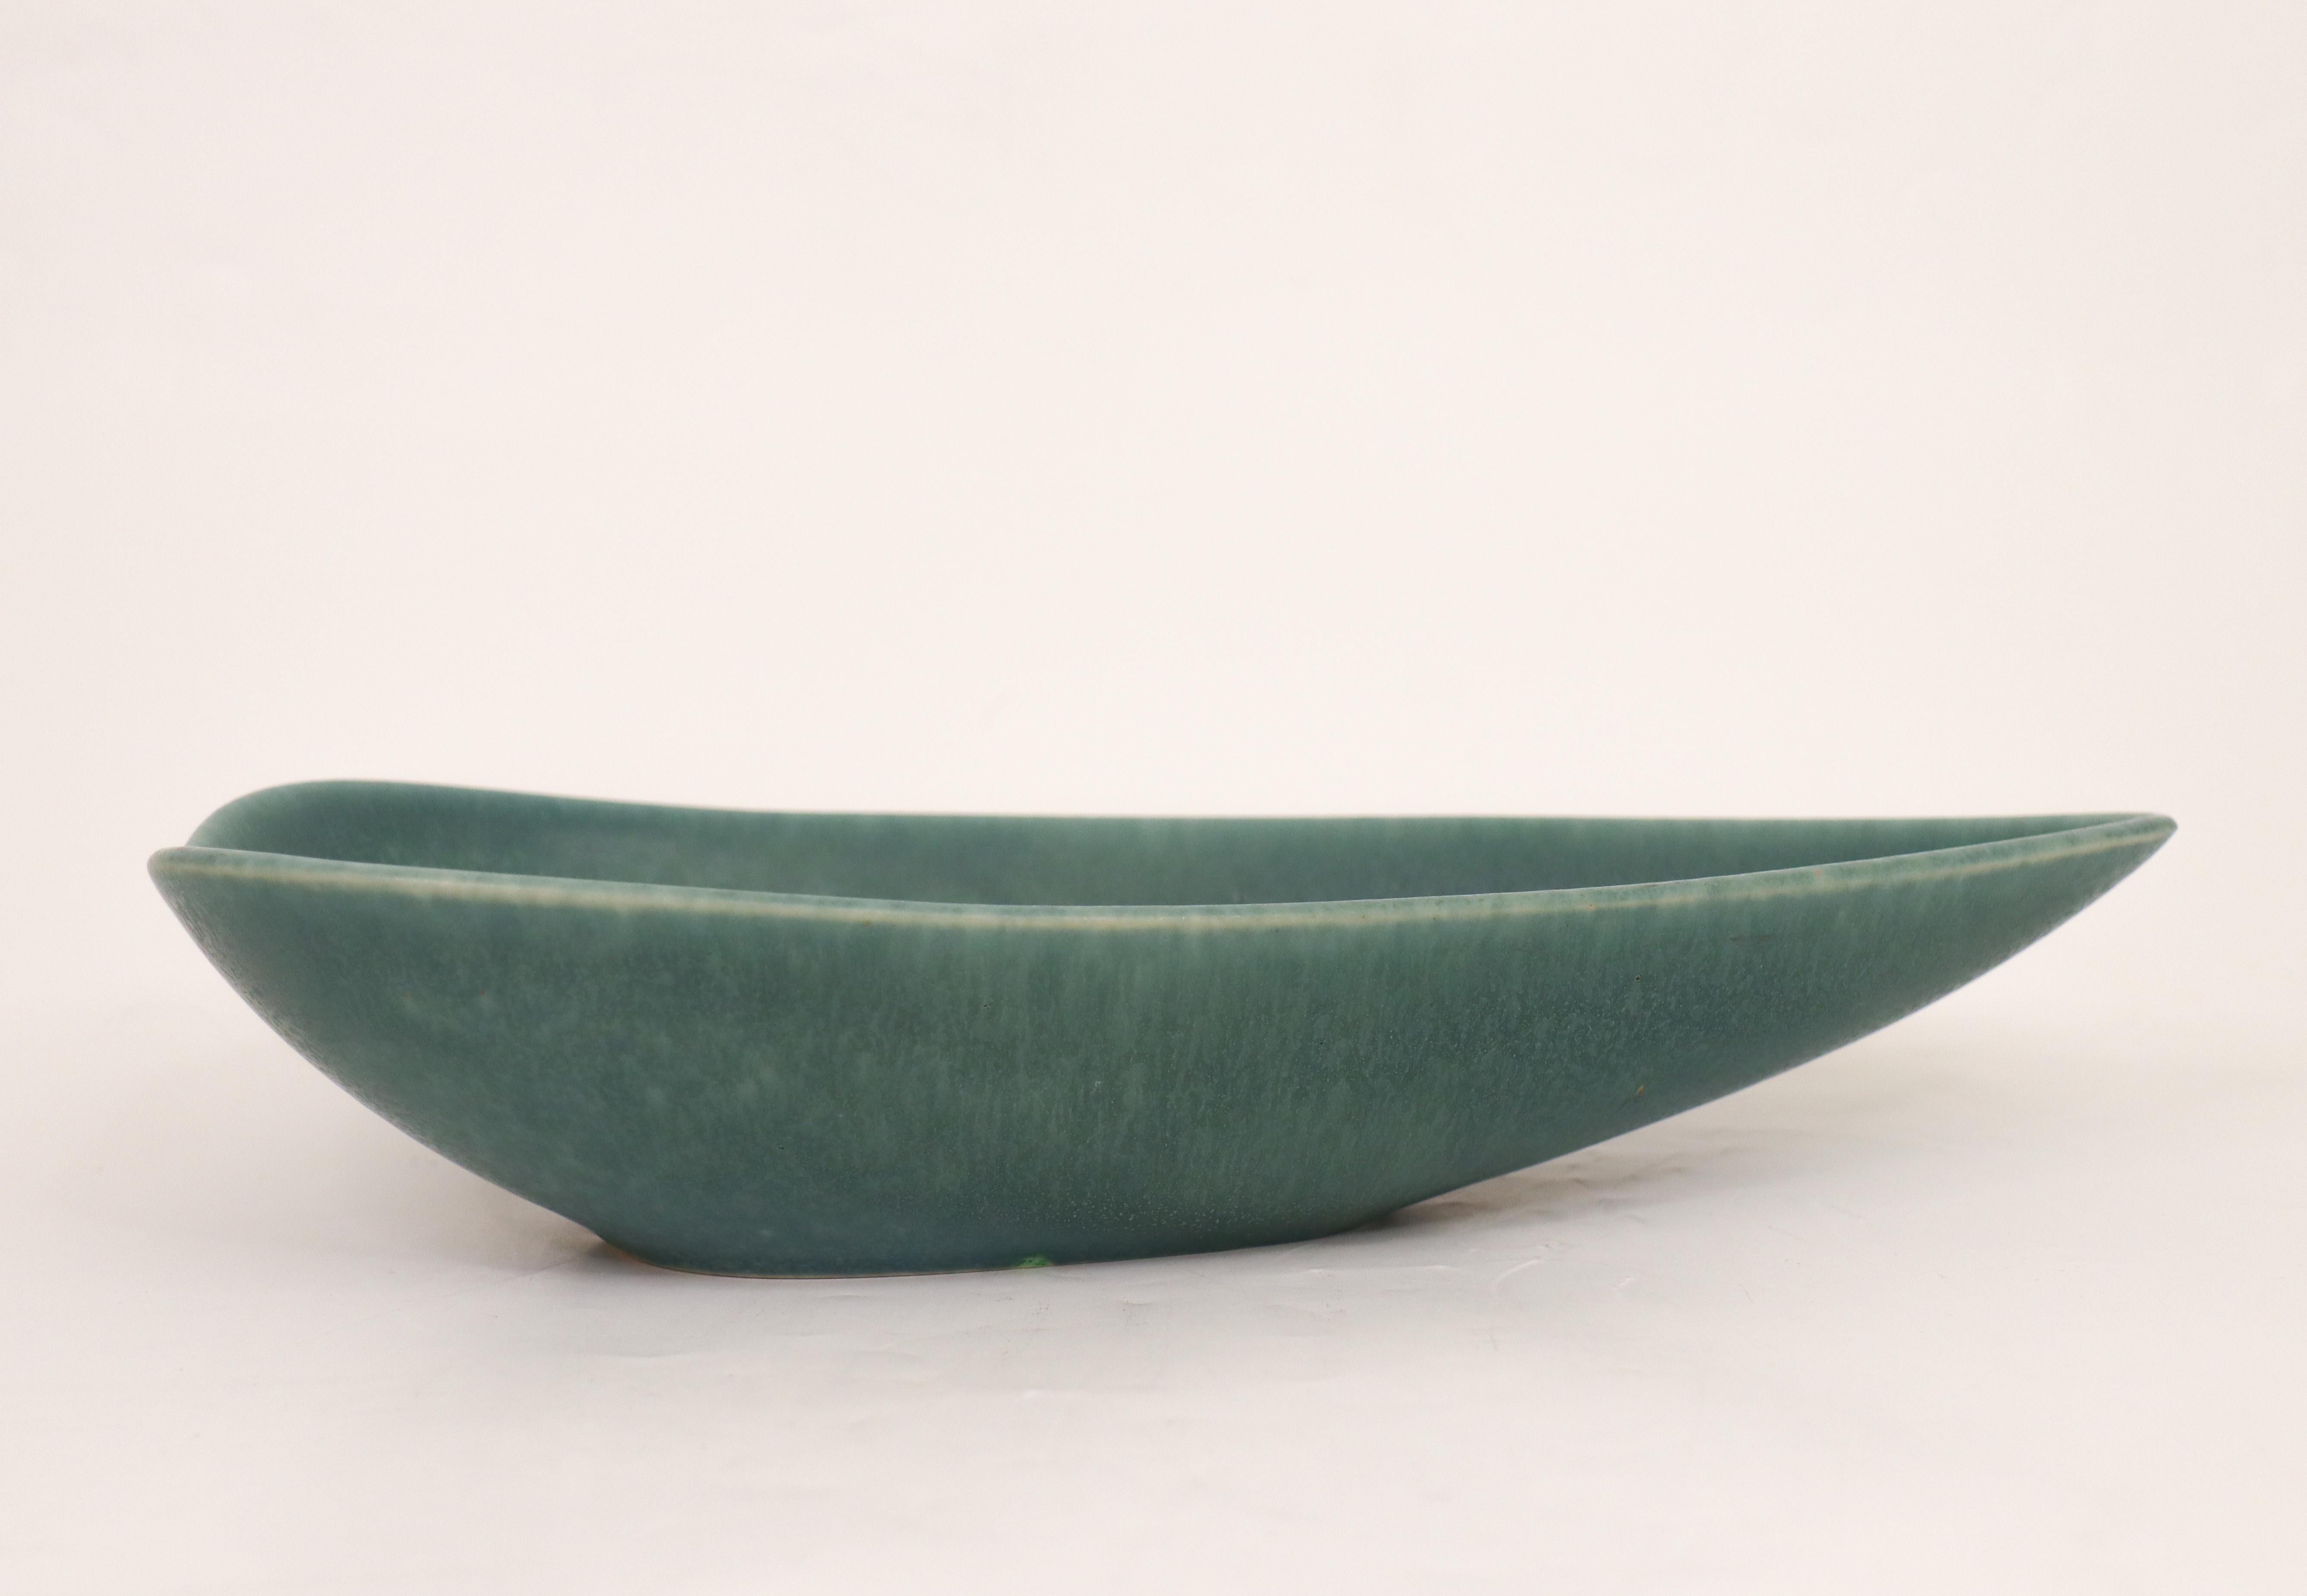 A leaf-shaped, green bowl designed by Gunnar Nylund at Rörstrand, the bowl is 28,5 x 13 cm (11.4